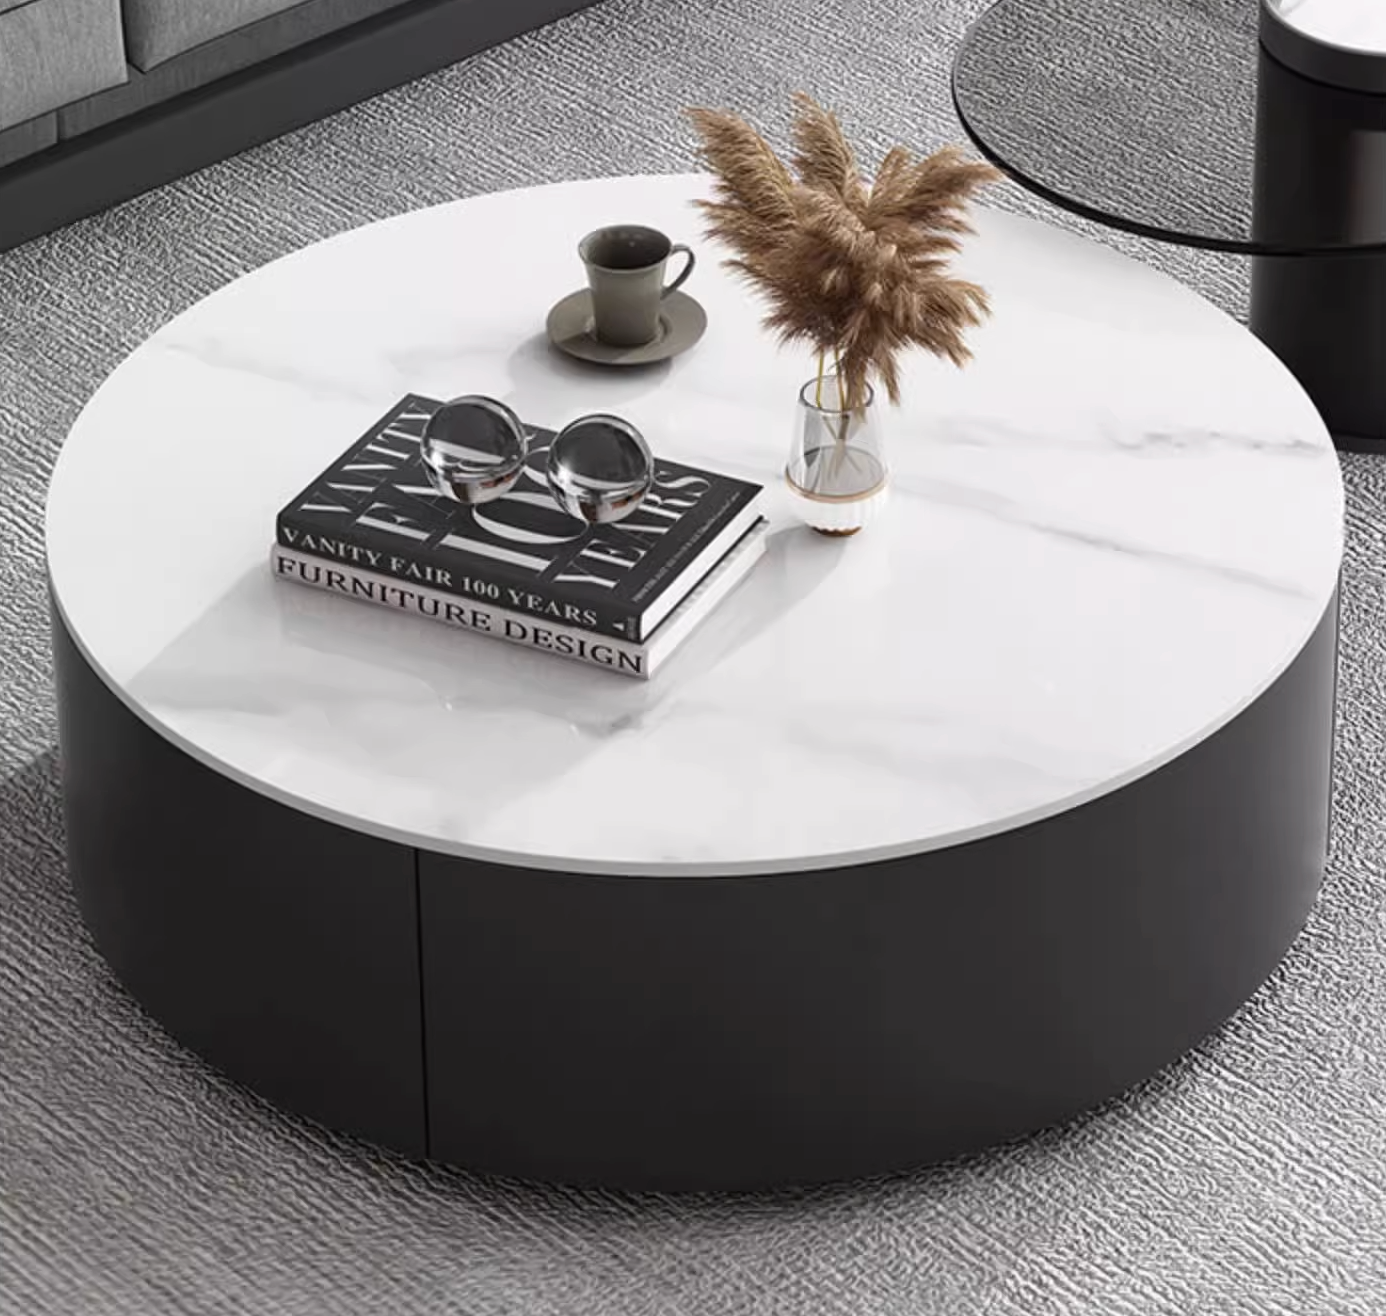 Mosaic Round Nesting Coffee Table Set With Seat Pad｜ DC Concept